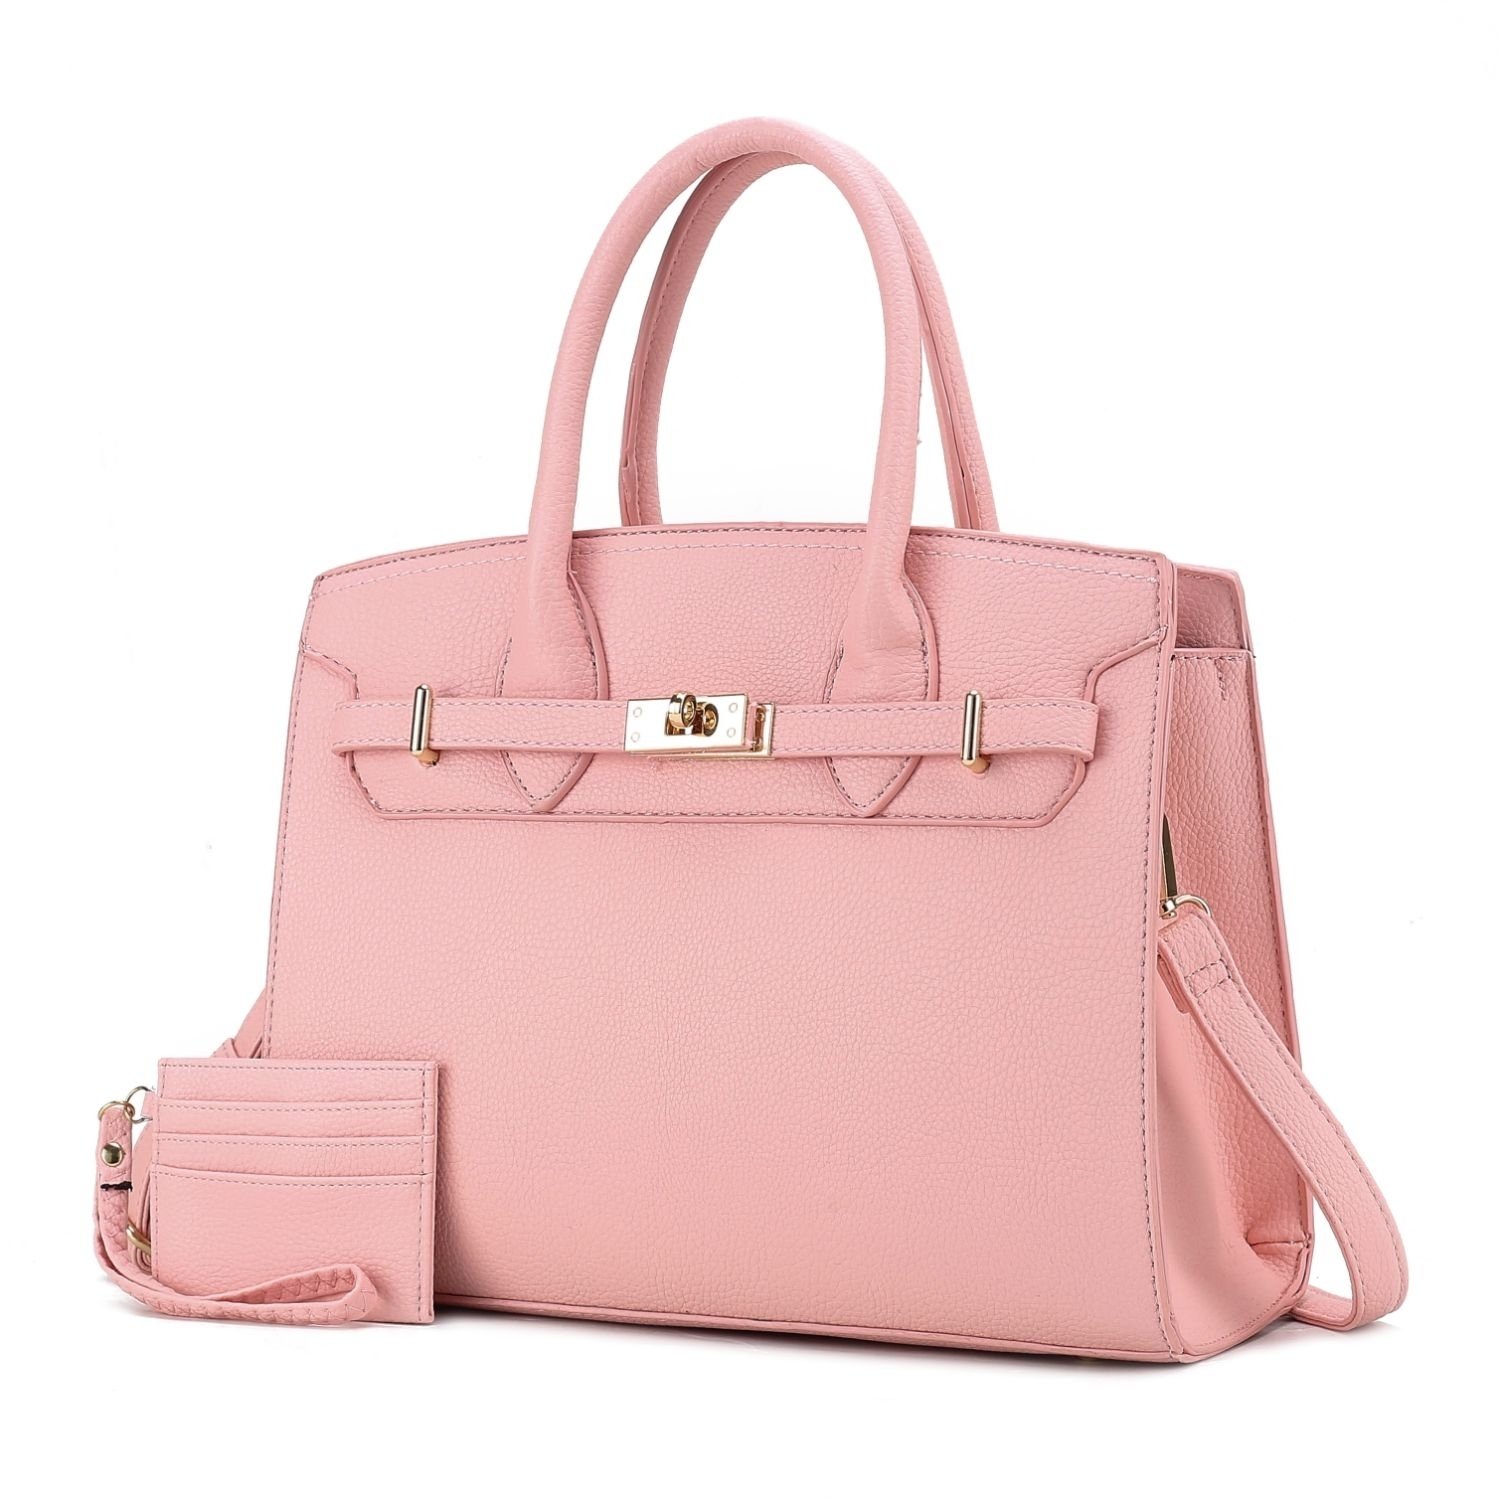 MKF Collection Calla Vegan Leather Women's Satchel Bag With Credit Card Holder-2 Pieces By Mia K - Pink